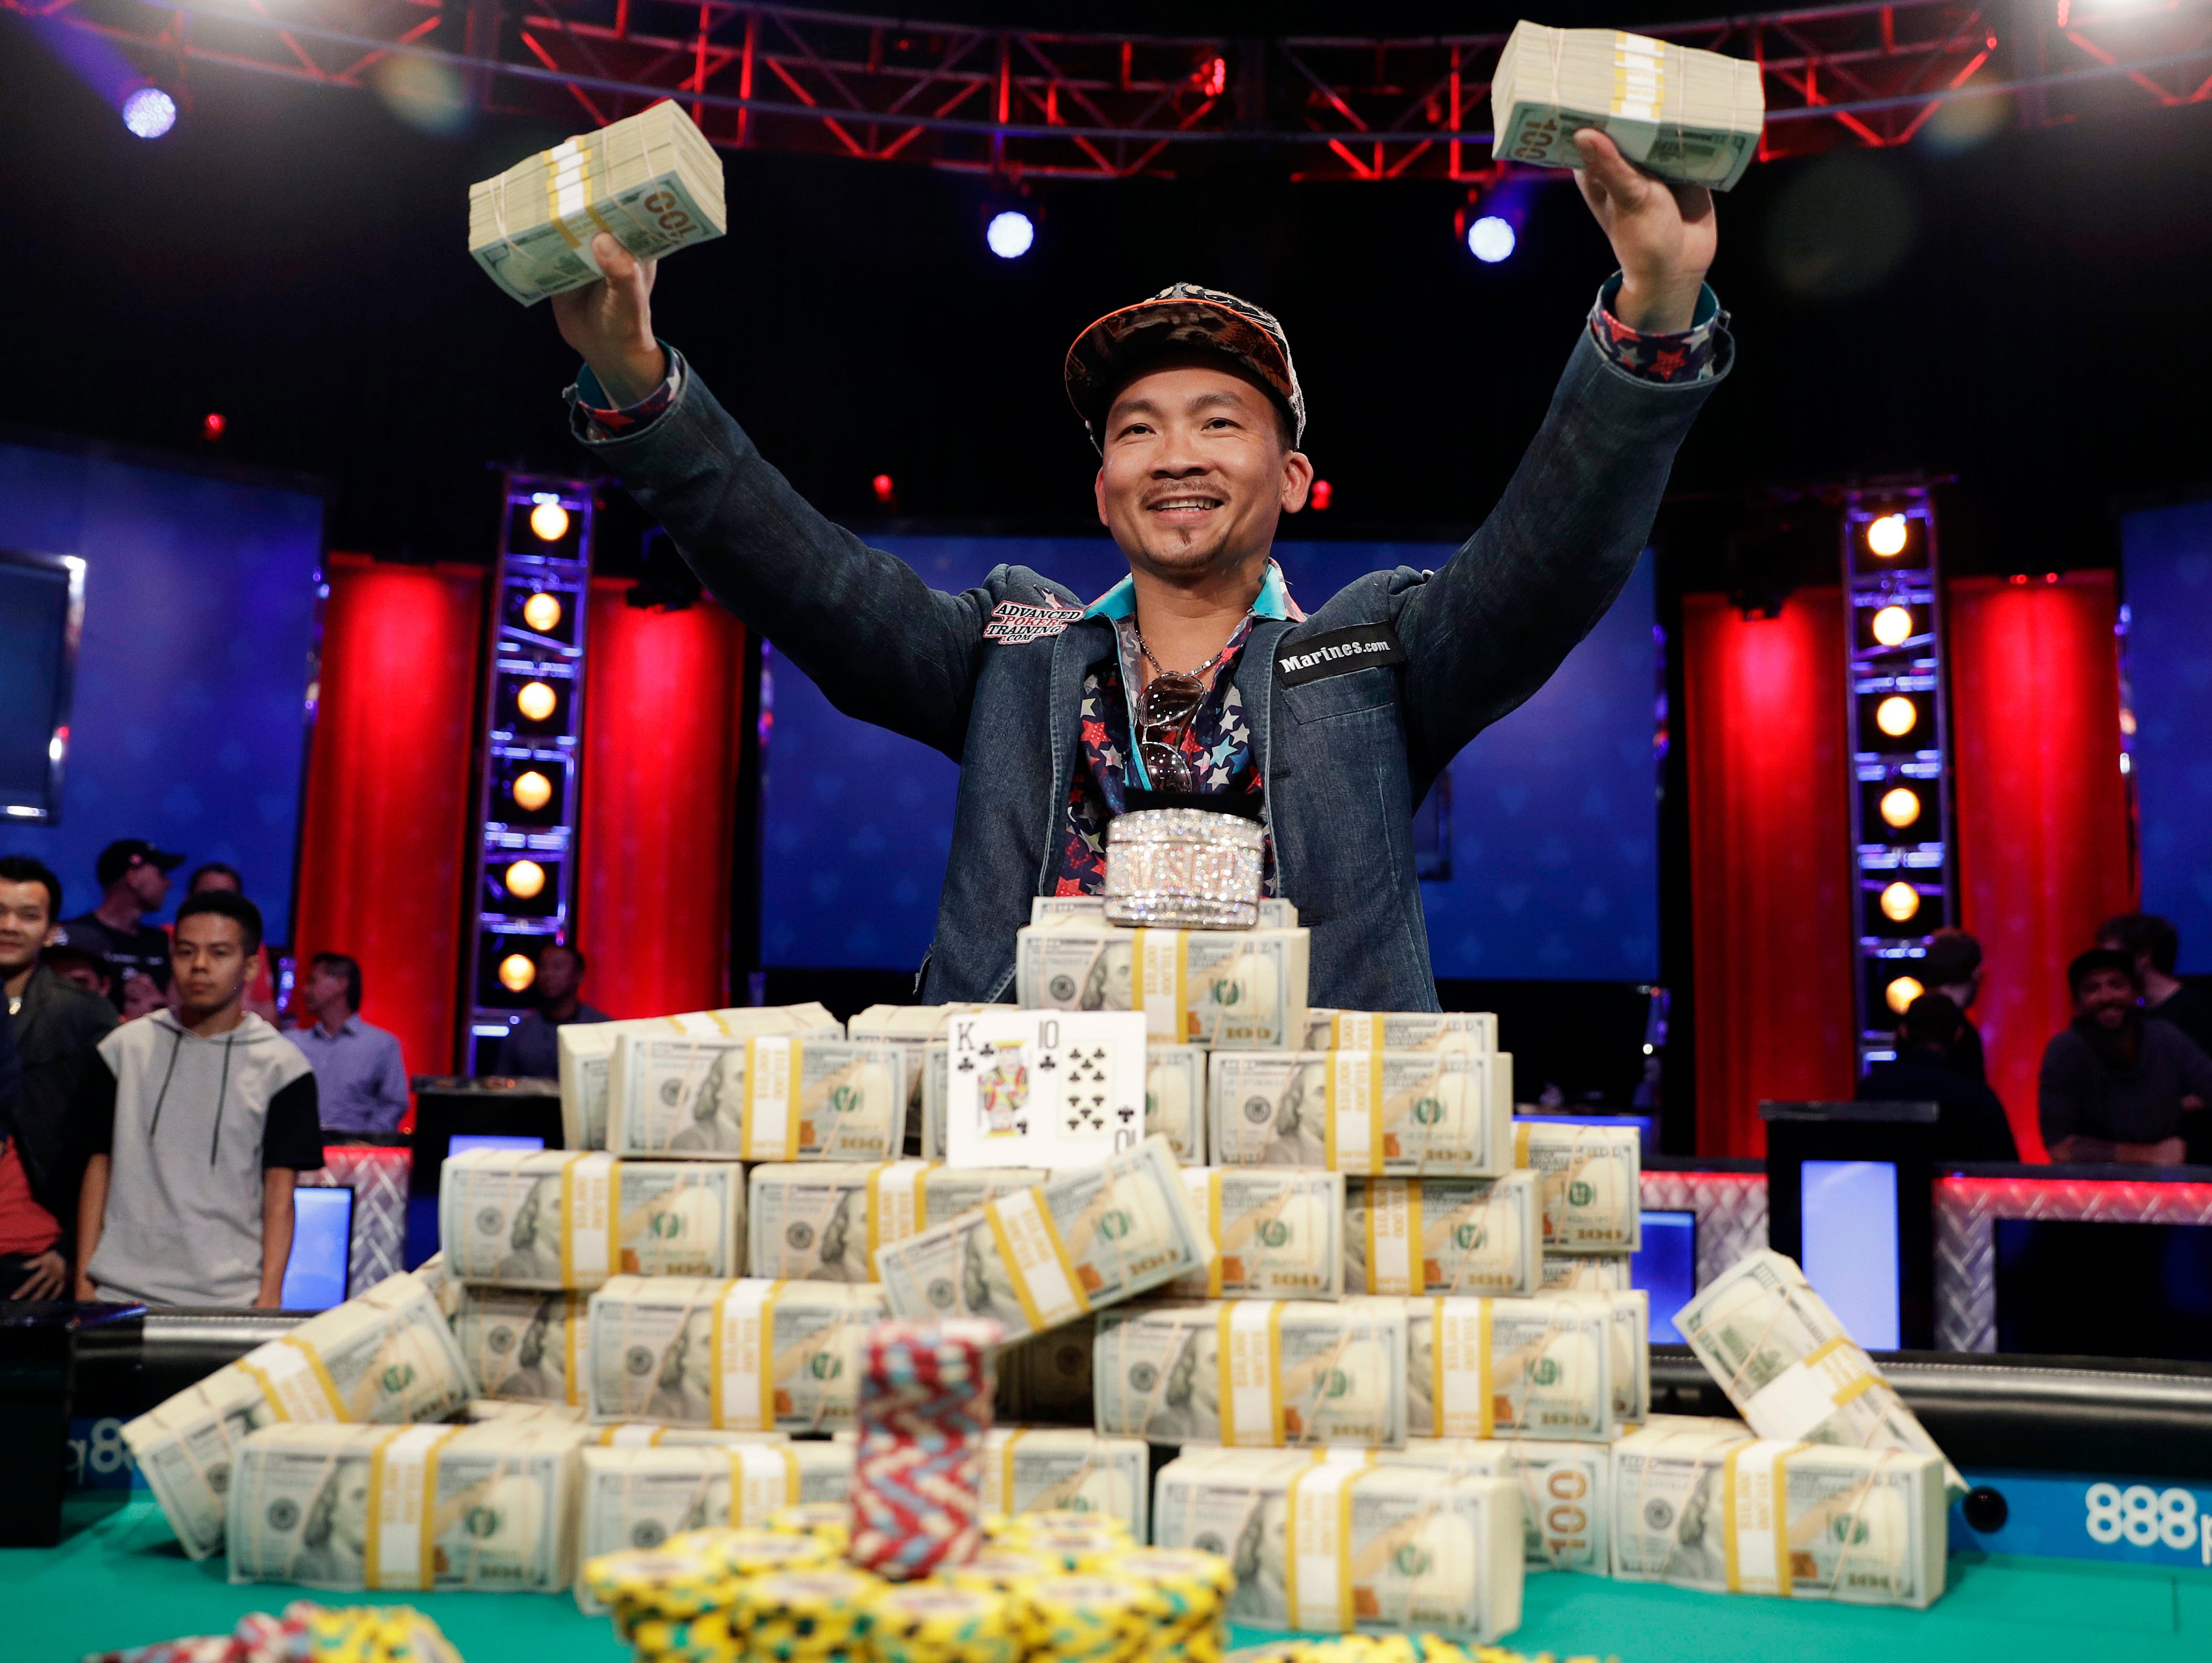 Qui Nguyen hoists his winnings after beating Gordon Vayo at the final table to win the World Series of Poker.